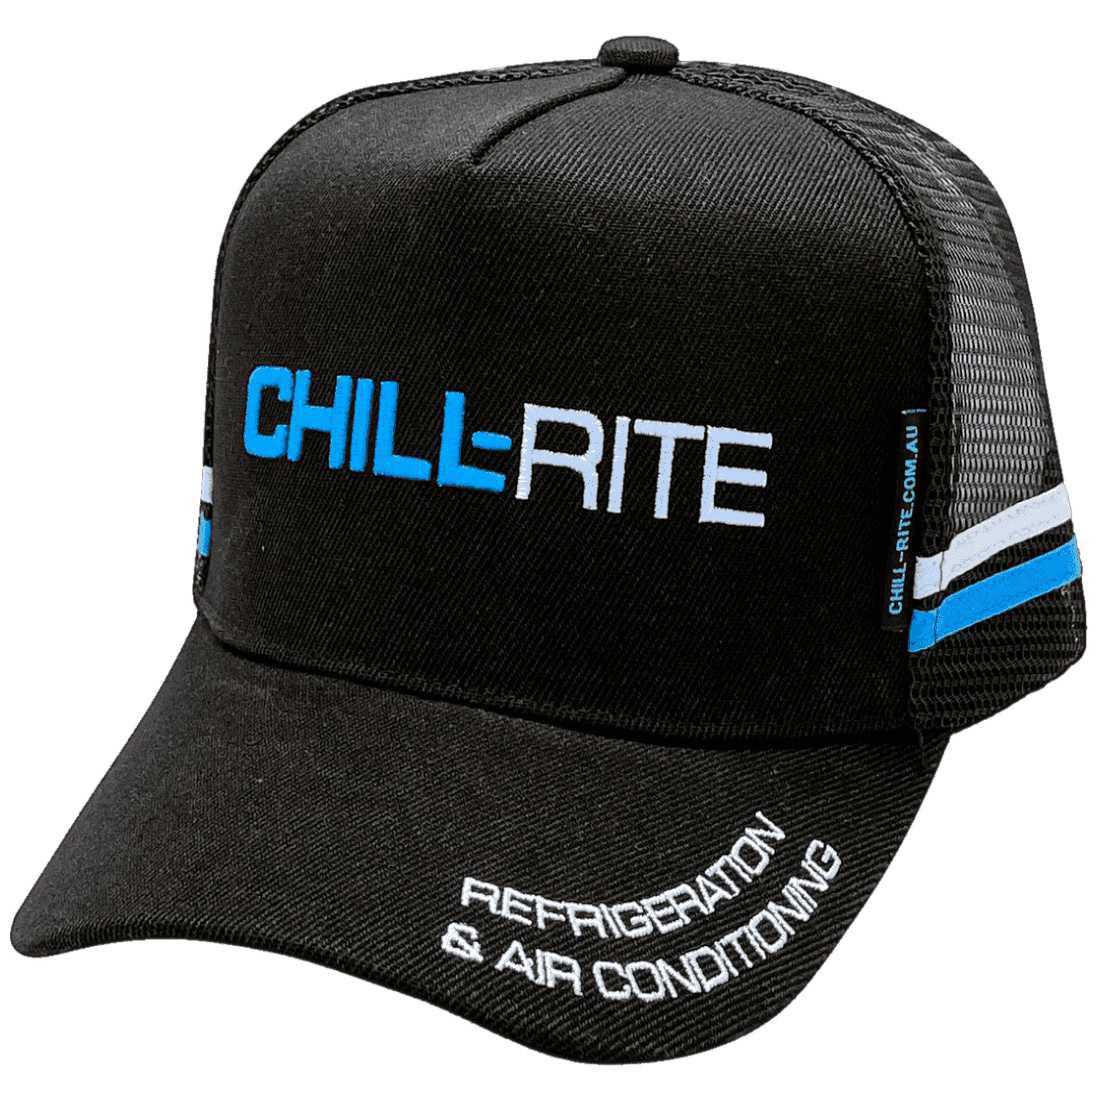 Chill-Rite Refrigeration and Air Conditioning HP Original Midrange Aussie Trucker Hat with double side bands